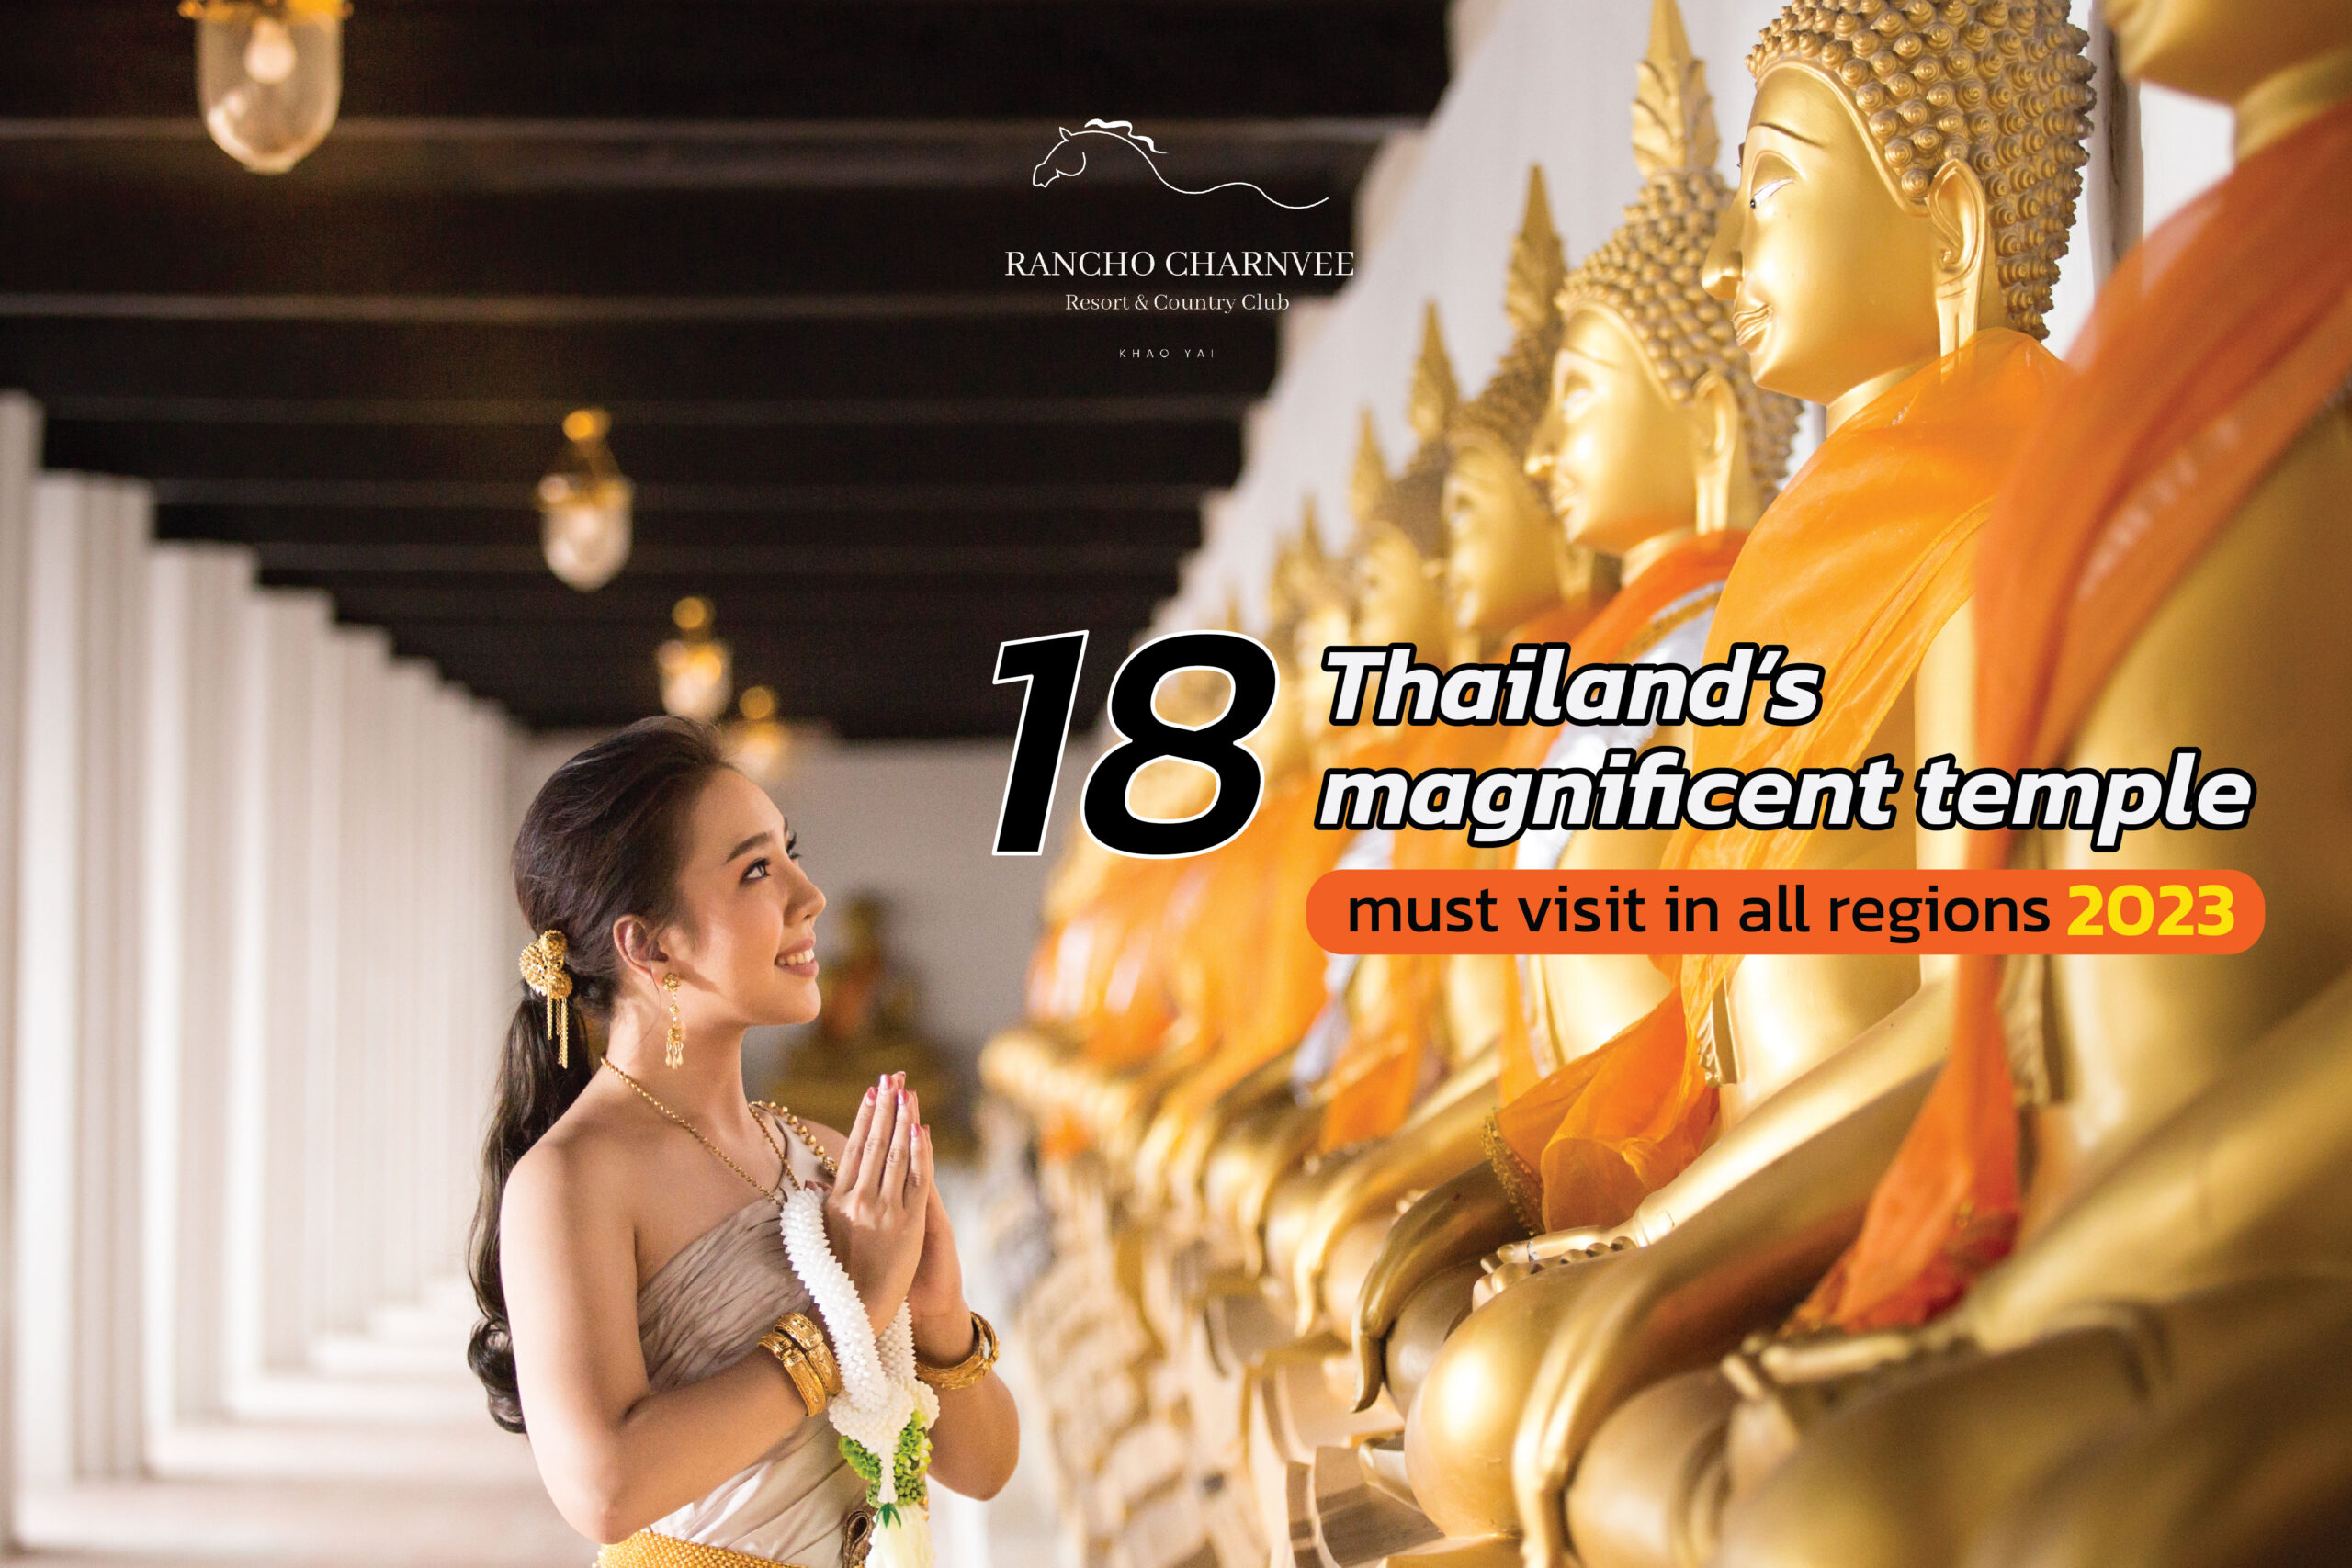 18 Magnificent Thailand’s Temples must visit in all regions 2023